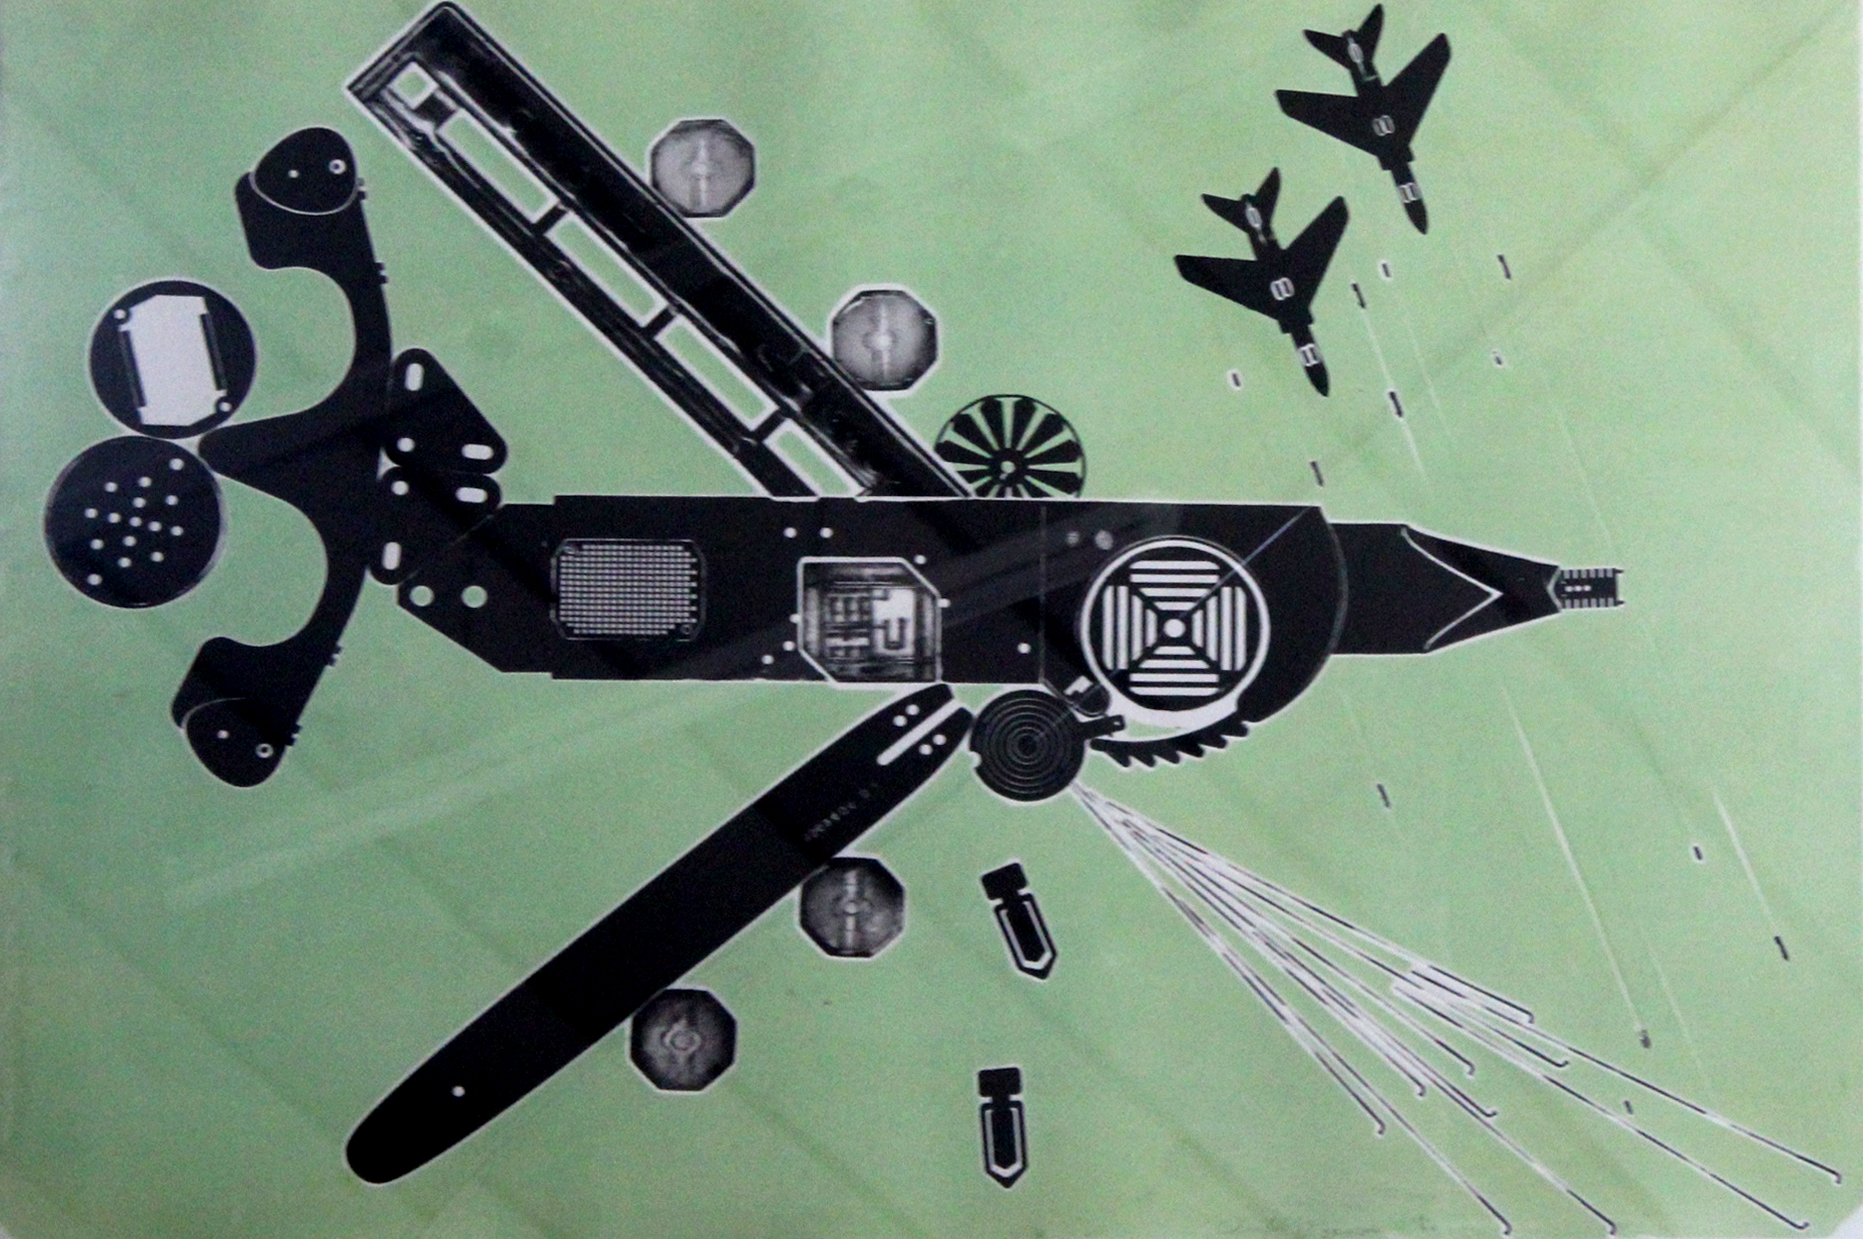 AR Colin Self (born 1941 "C130 gunship" (from The Odyssey Series) mixed media, signed, dated 27 9